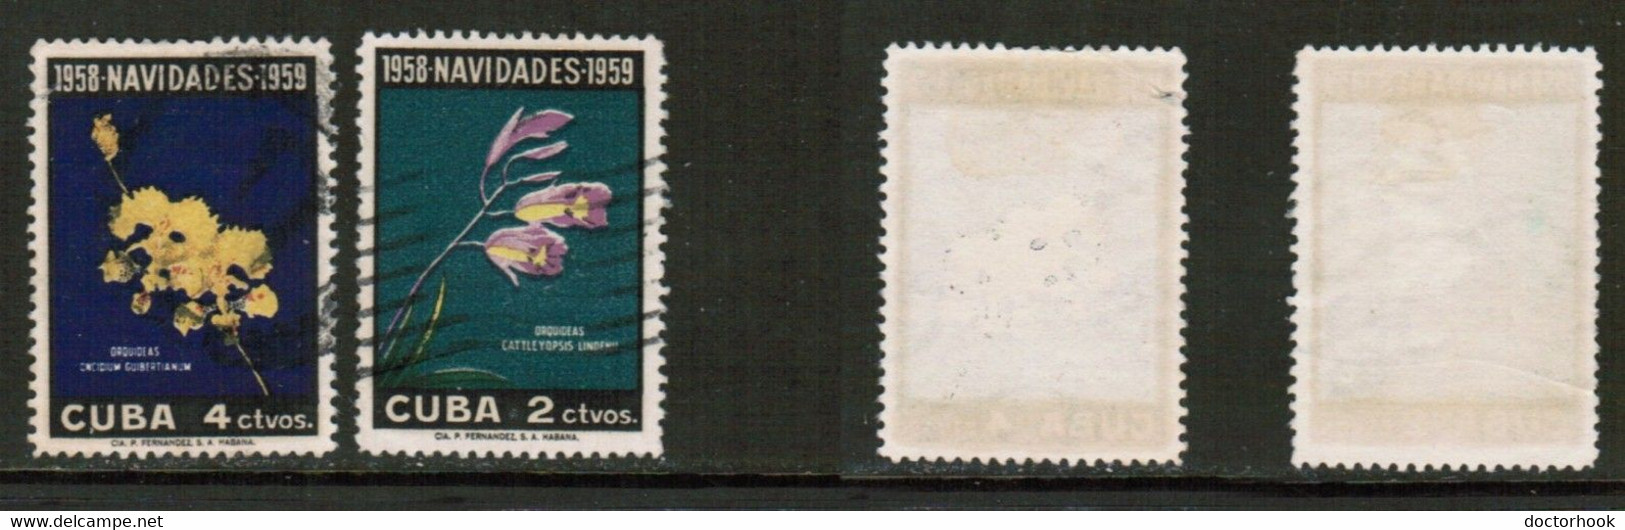 CUBA  Scott # 611-2 USED (CONDITION AS PER SCAN) (WW-1-65) - Used Stamps